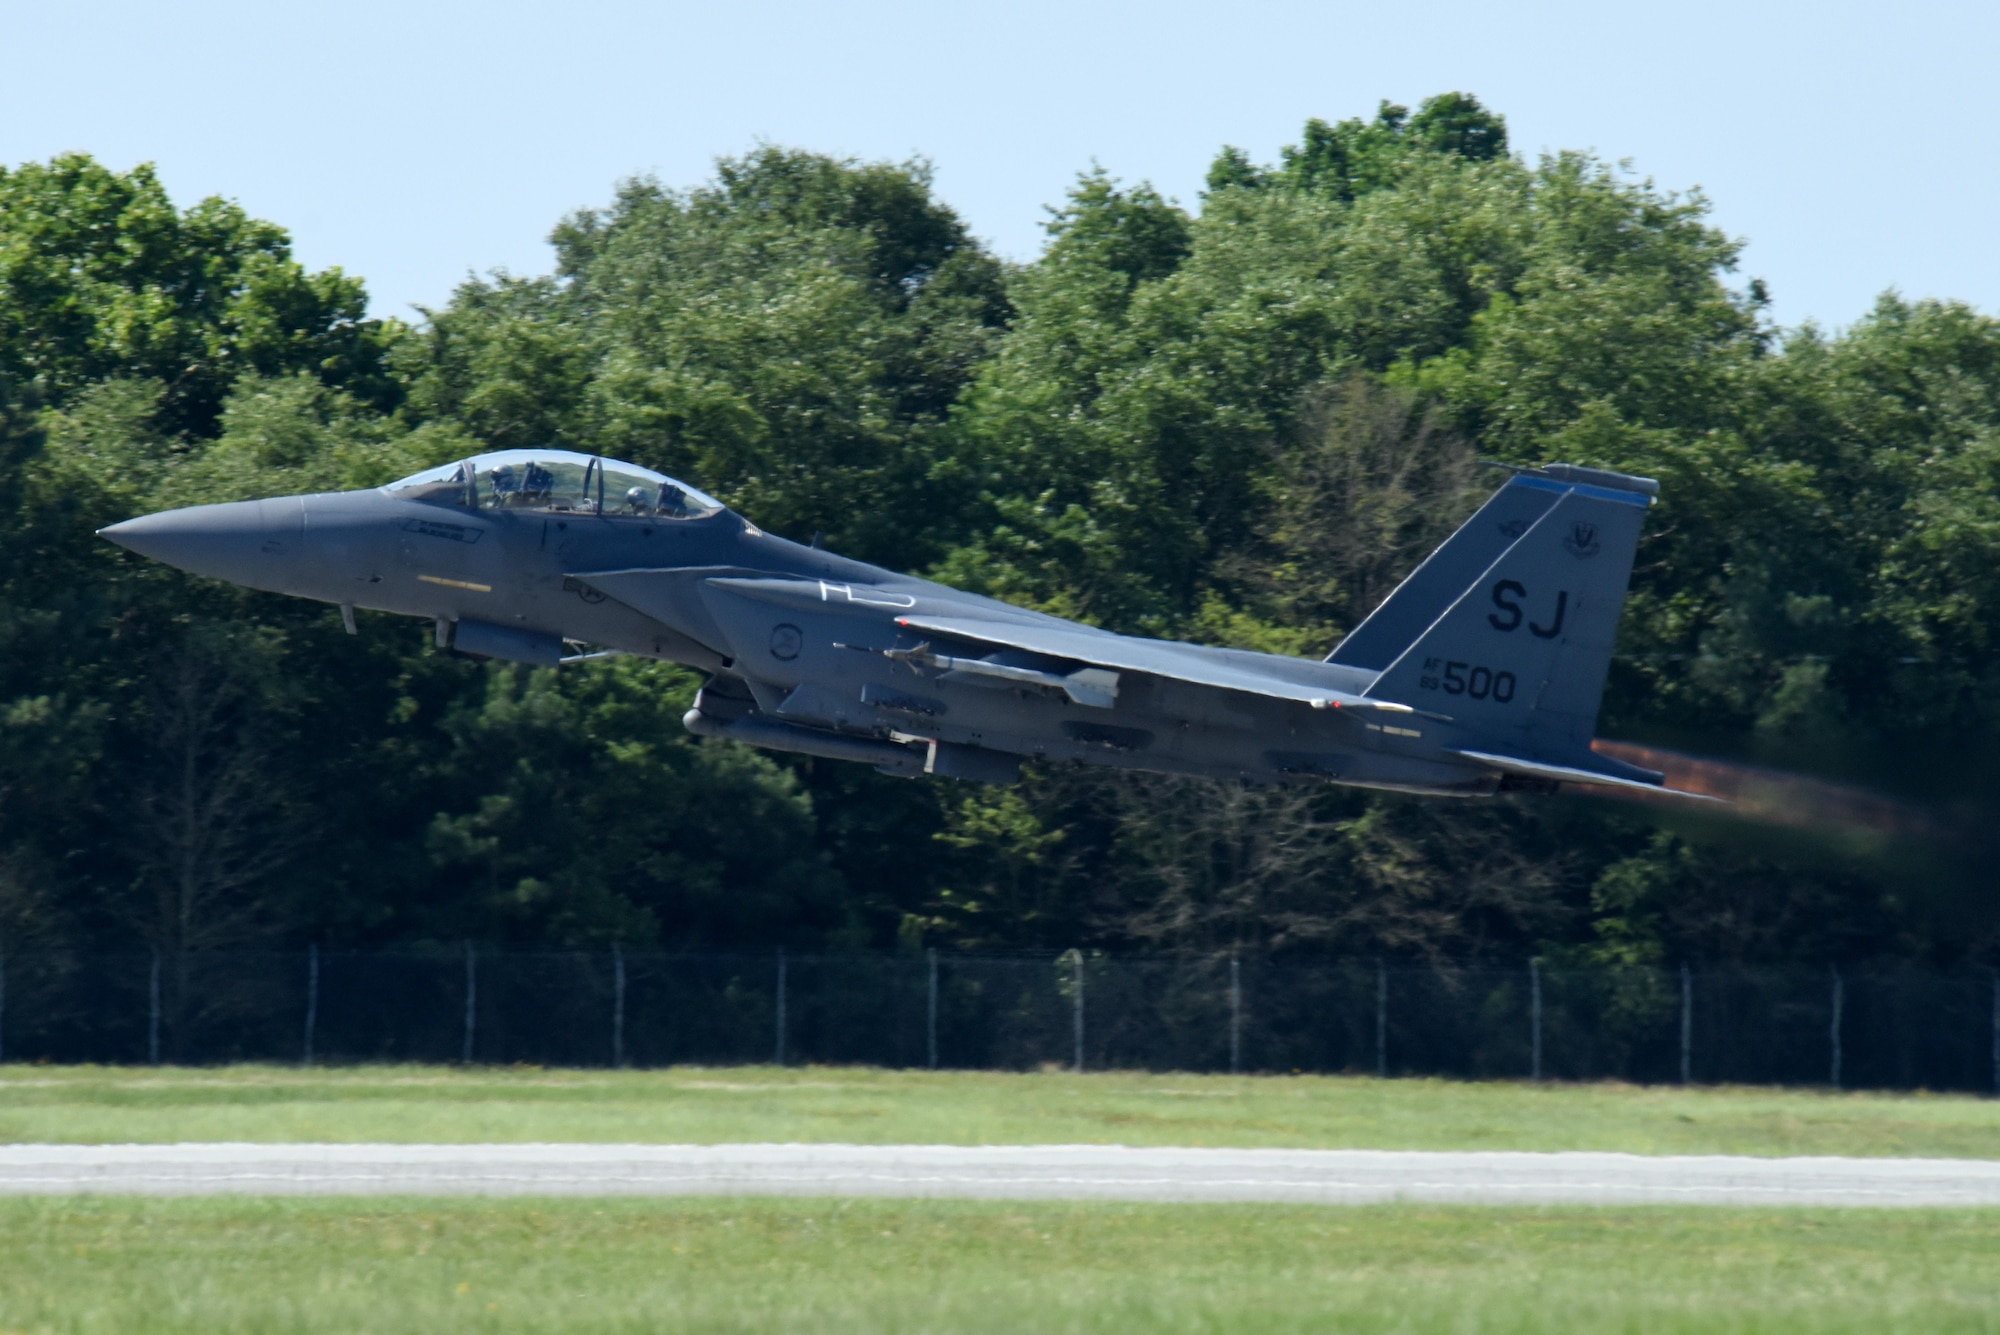 Lt. Col. Eric Schmidt, 334th Fighter Squadron director of operations and pilot, and Maj. Timothy Foery, 334th FS weapon systems officer, take off for a flight in the F-15E Strike Eagle June 17, 2016, at Seymour Johnson Air Force Base, North Carolina. Schmidt was completing his final flight in the aircraft, also surpassing 3,000 hours during the same flight. (U.S. Air Force photo/Tech. Sgt. Chuck Broadway)